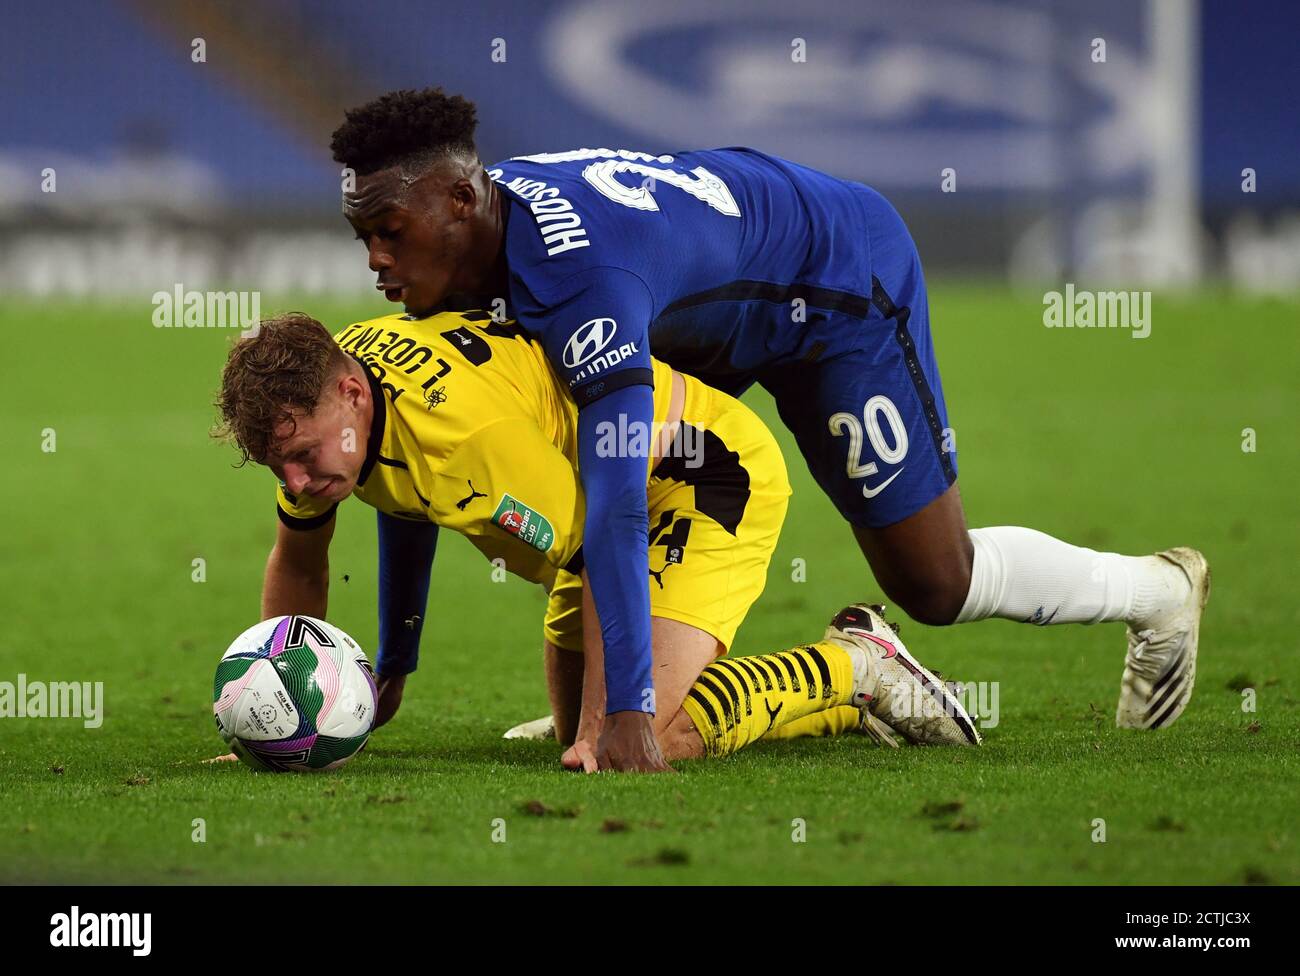 Chelsea's Callum Hudson-Odoi and Barnsley's Kilian Ludewig battle for the ball during the Carabao Cup third round match at Stamford Bridge, London. Stock Photo